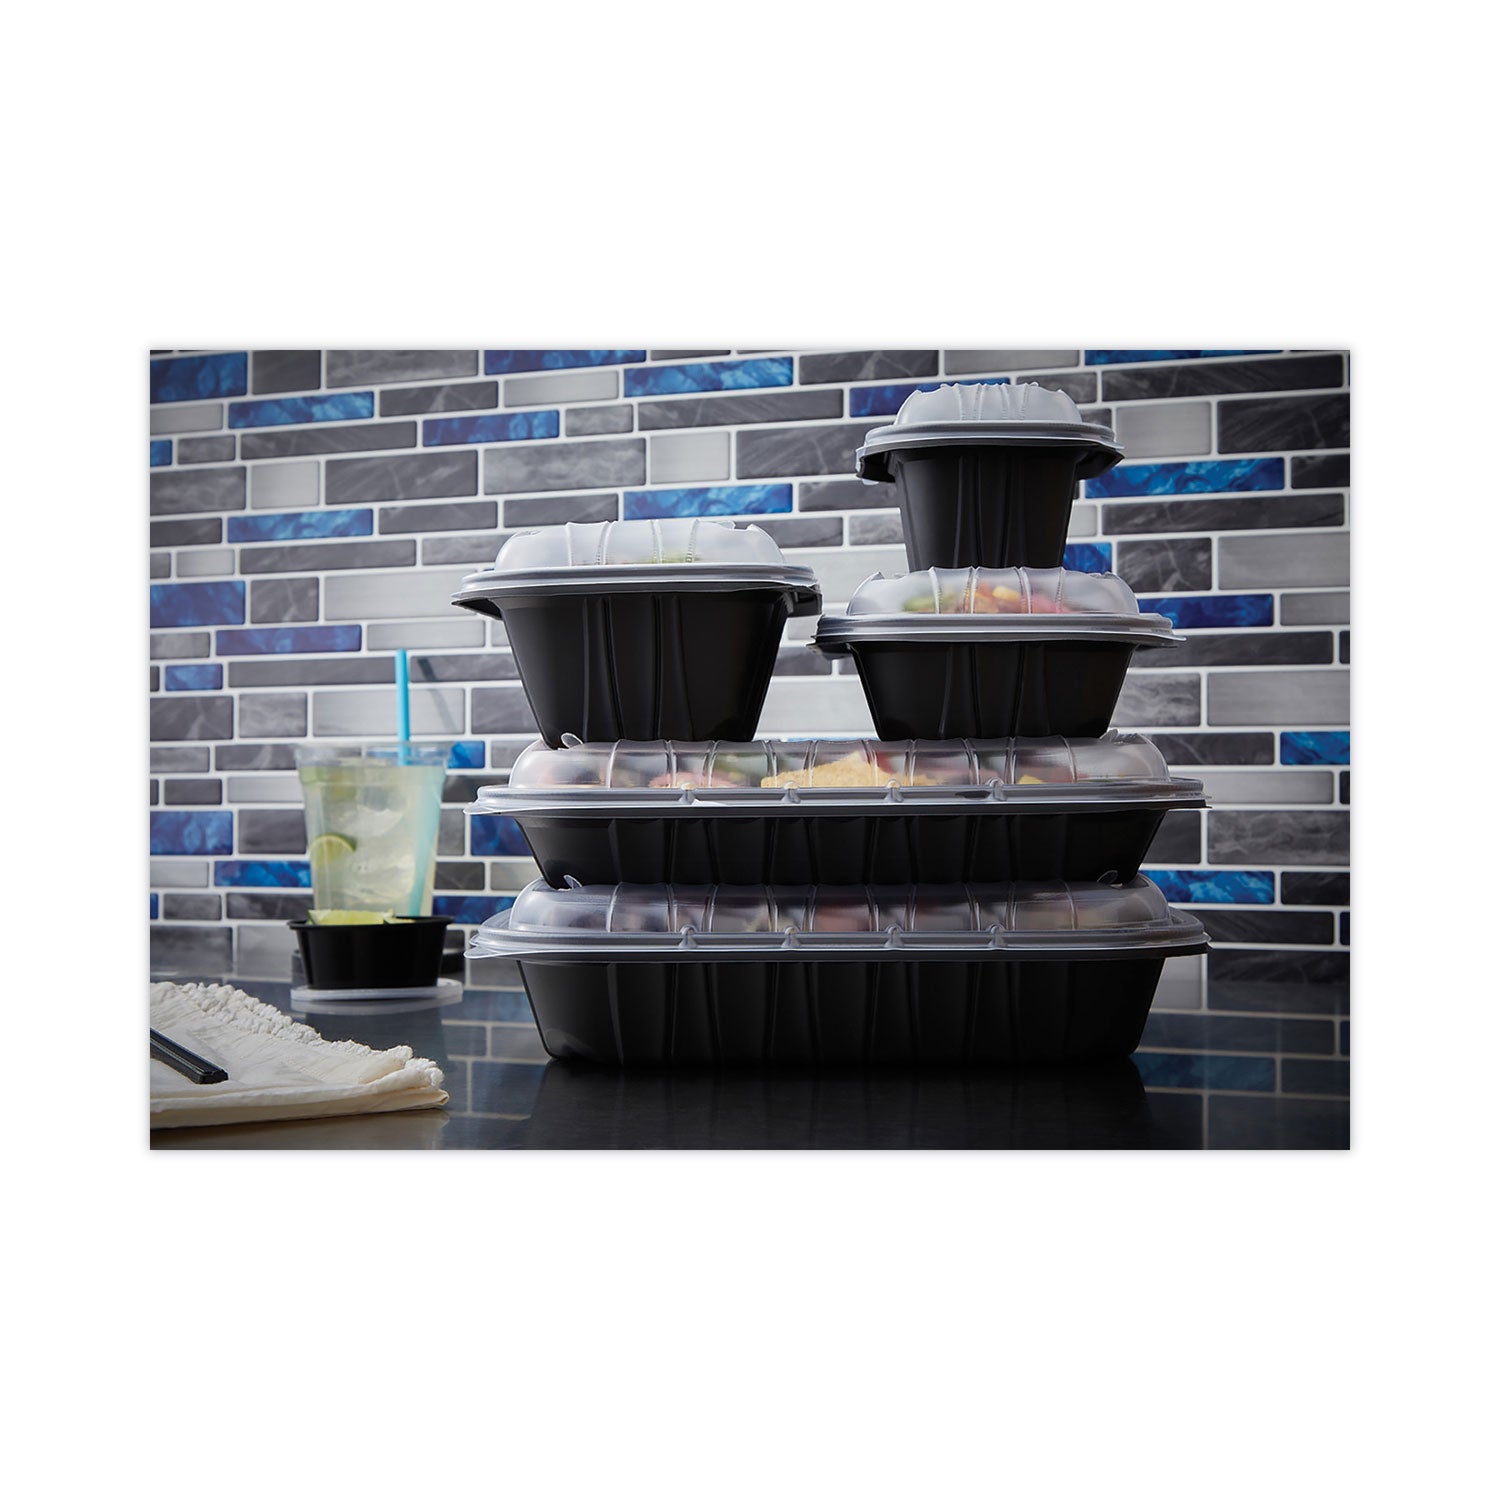 earthchoice-entree2go-takeout-container-64-oz-1175-x-875-x-213-black-plastic-200-carton_pctycnb12x96400 - 5